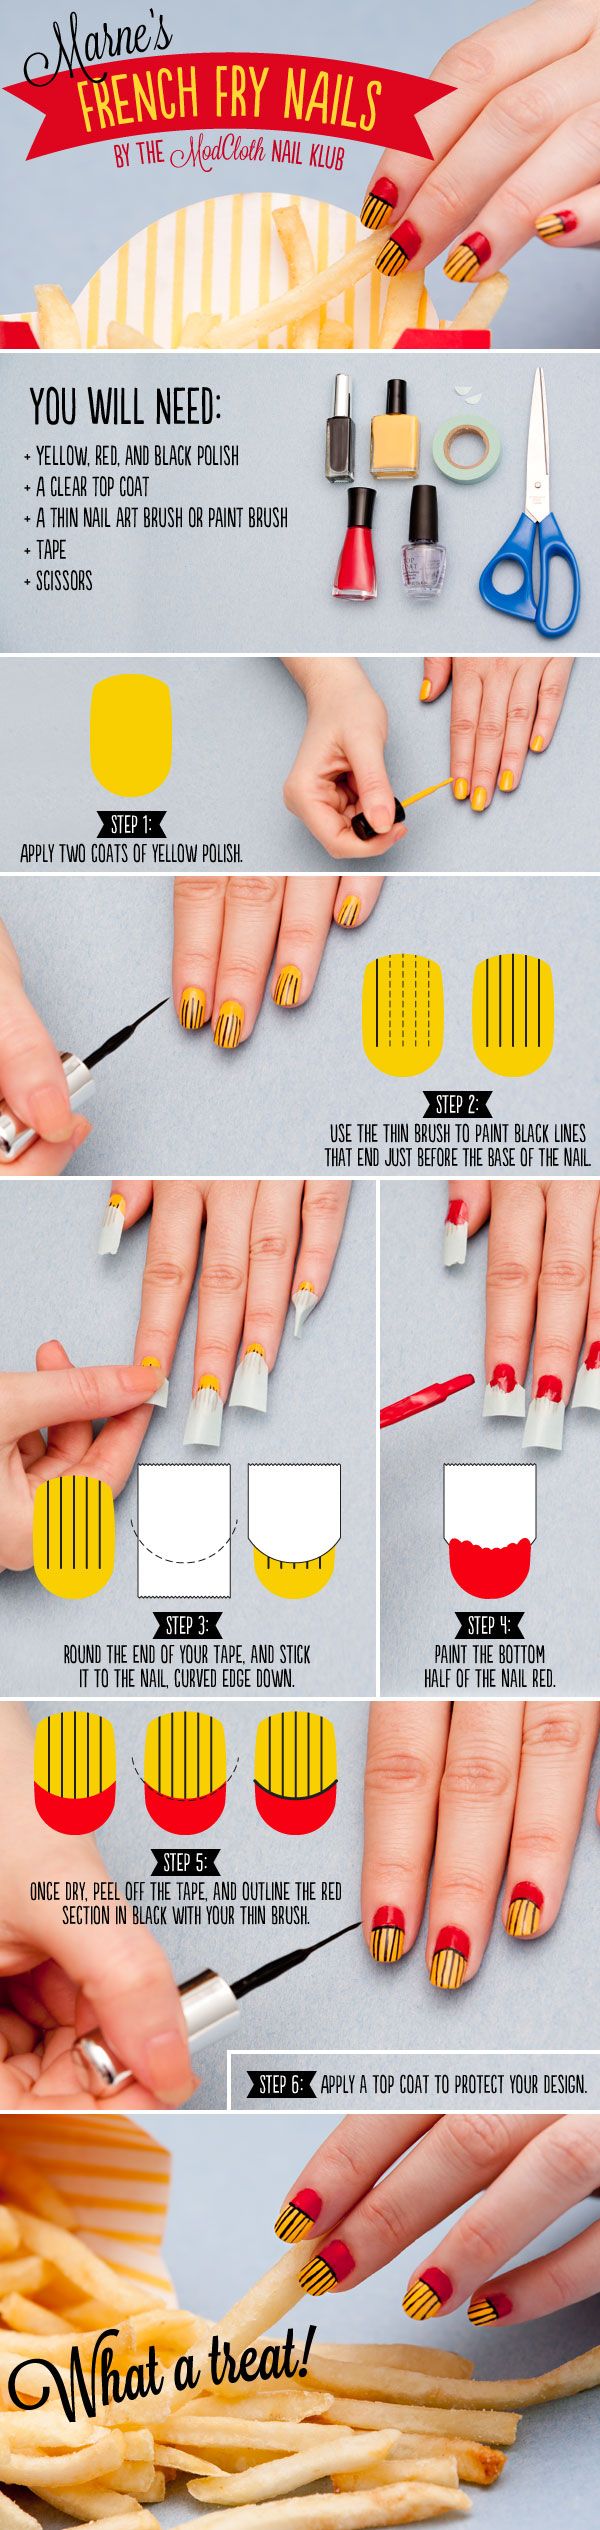 French Fry Nails